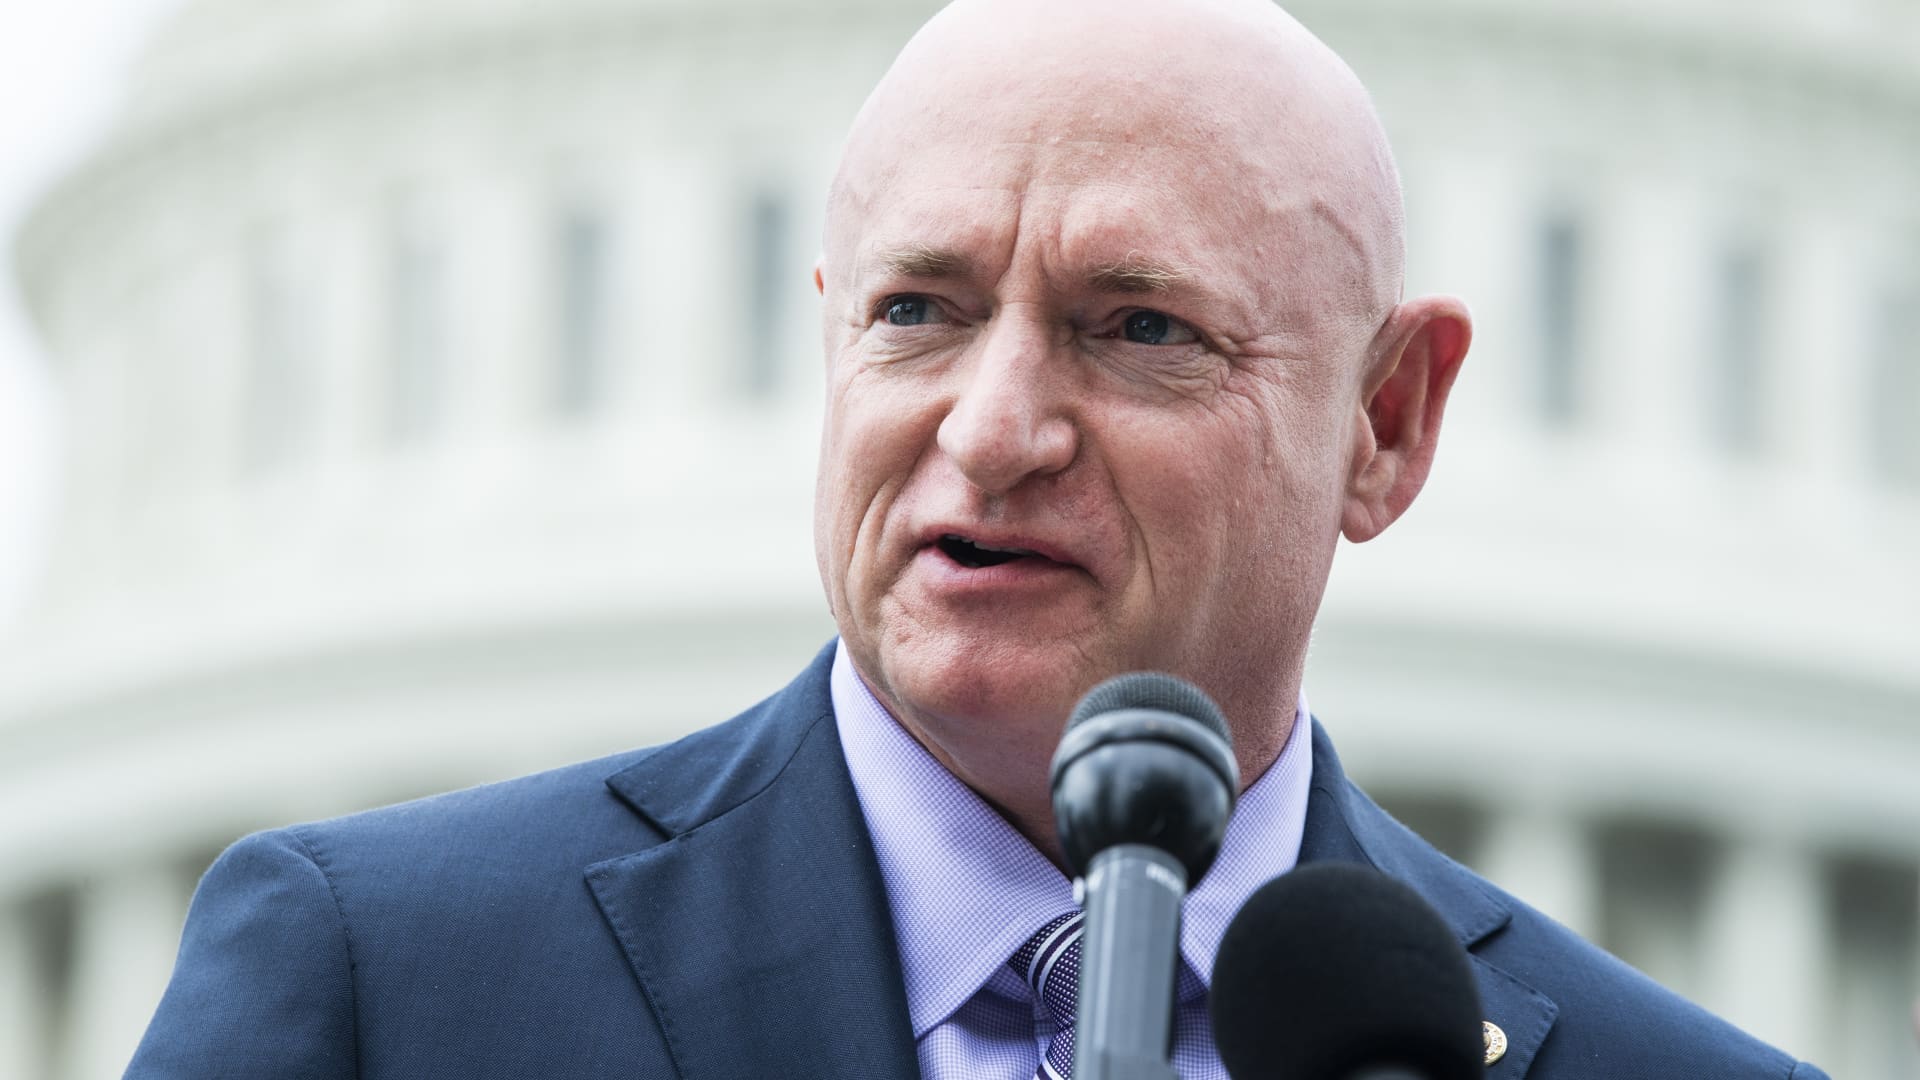 Sen. Mark Kelly, D-Ariz., conducts a news conference outside the Capitol to discuss the Military Justice Improvement and Increasing Prevention Act, which would remove serious crime prosecution out of the chain of command, on Thursday, April 29, 2021.